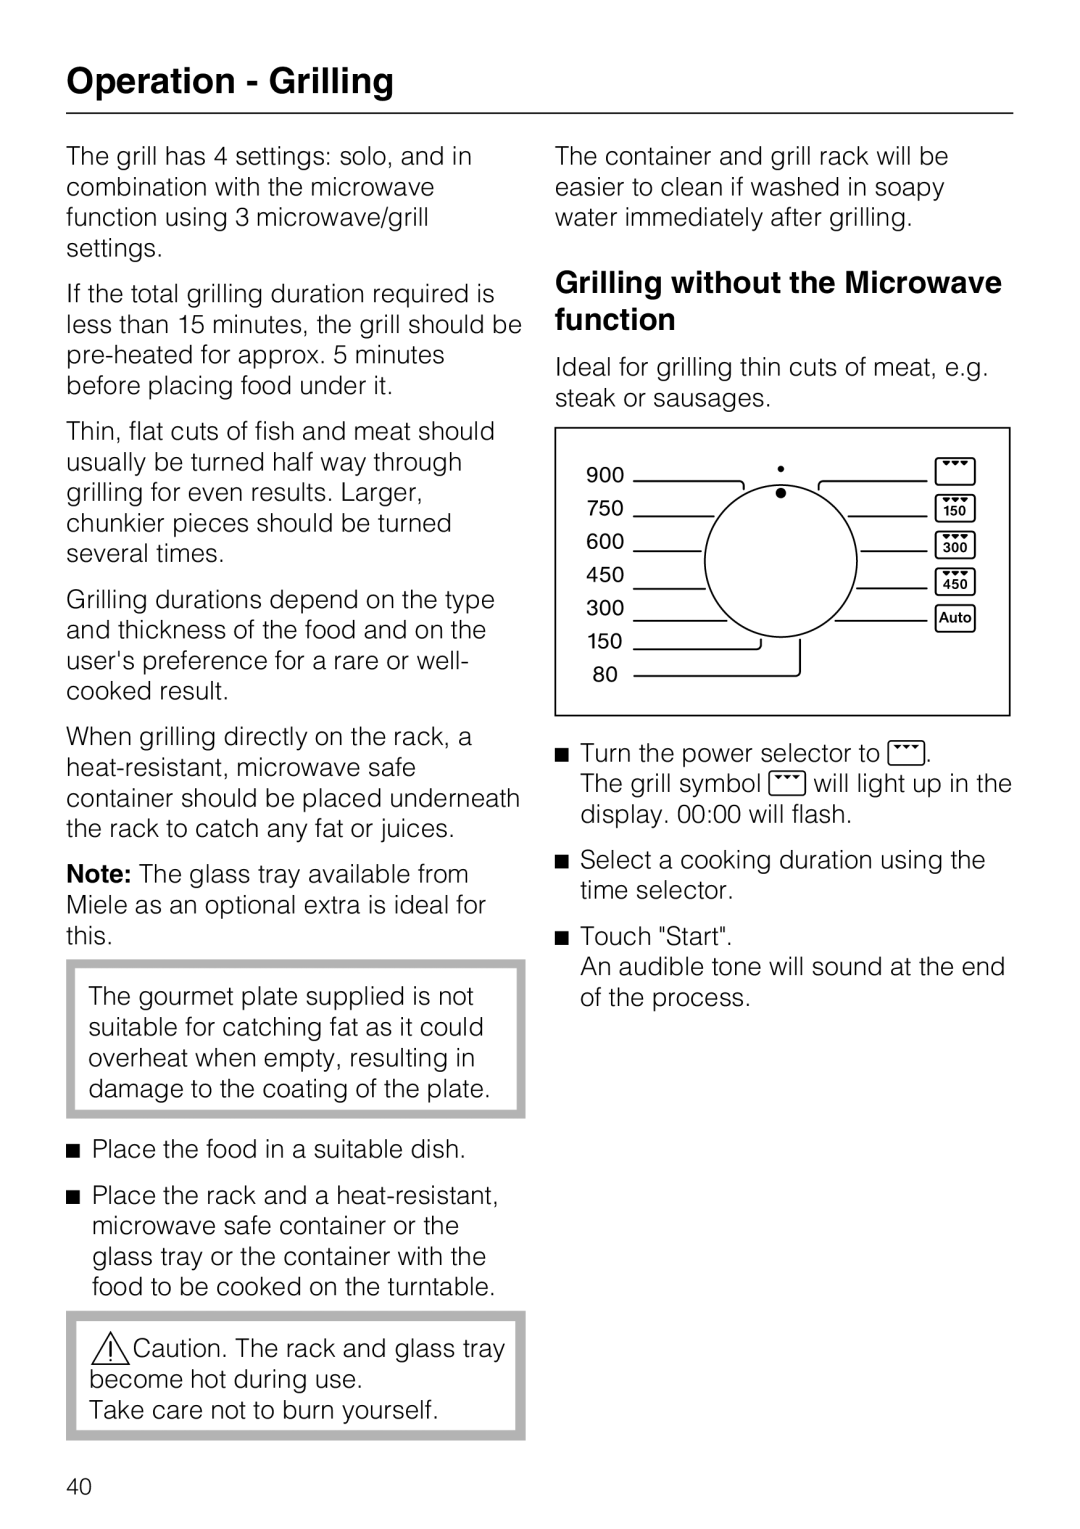 Miele 09 919 100 operating instructions Operation - Grilling, Grilling without the Microwave function 